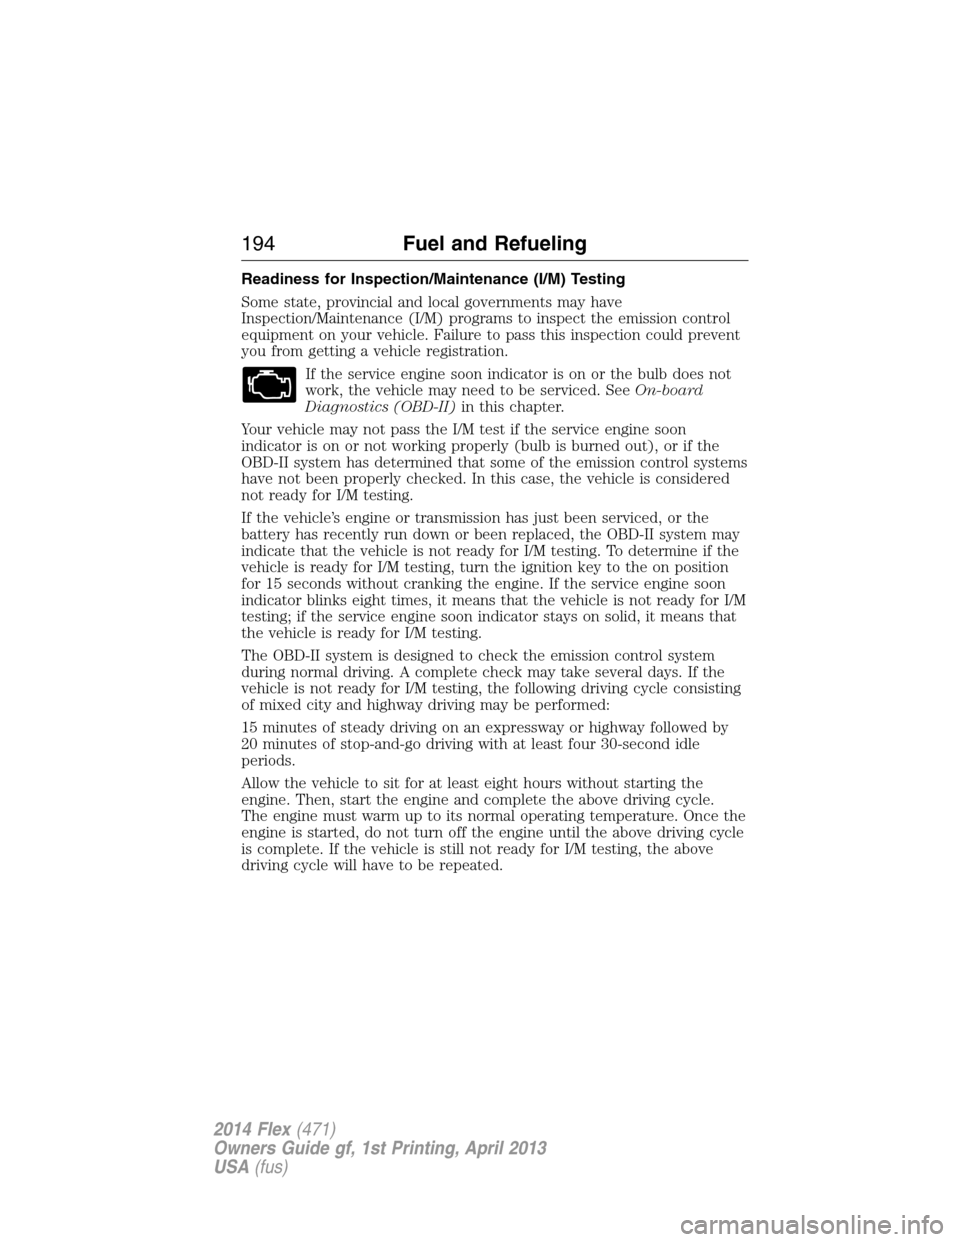 FORD FLEX 2014 1.G Owners Manual Readiness for Inspection/Maintenance (I/M) Testing
Some state, provincial and local governments may have
Inspection/Maintenance (I/M) programs to inspect the emission control
equipment on your vehicle